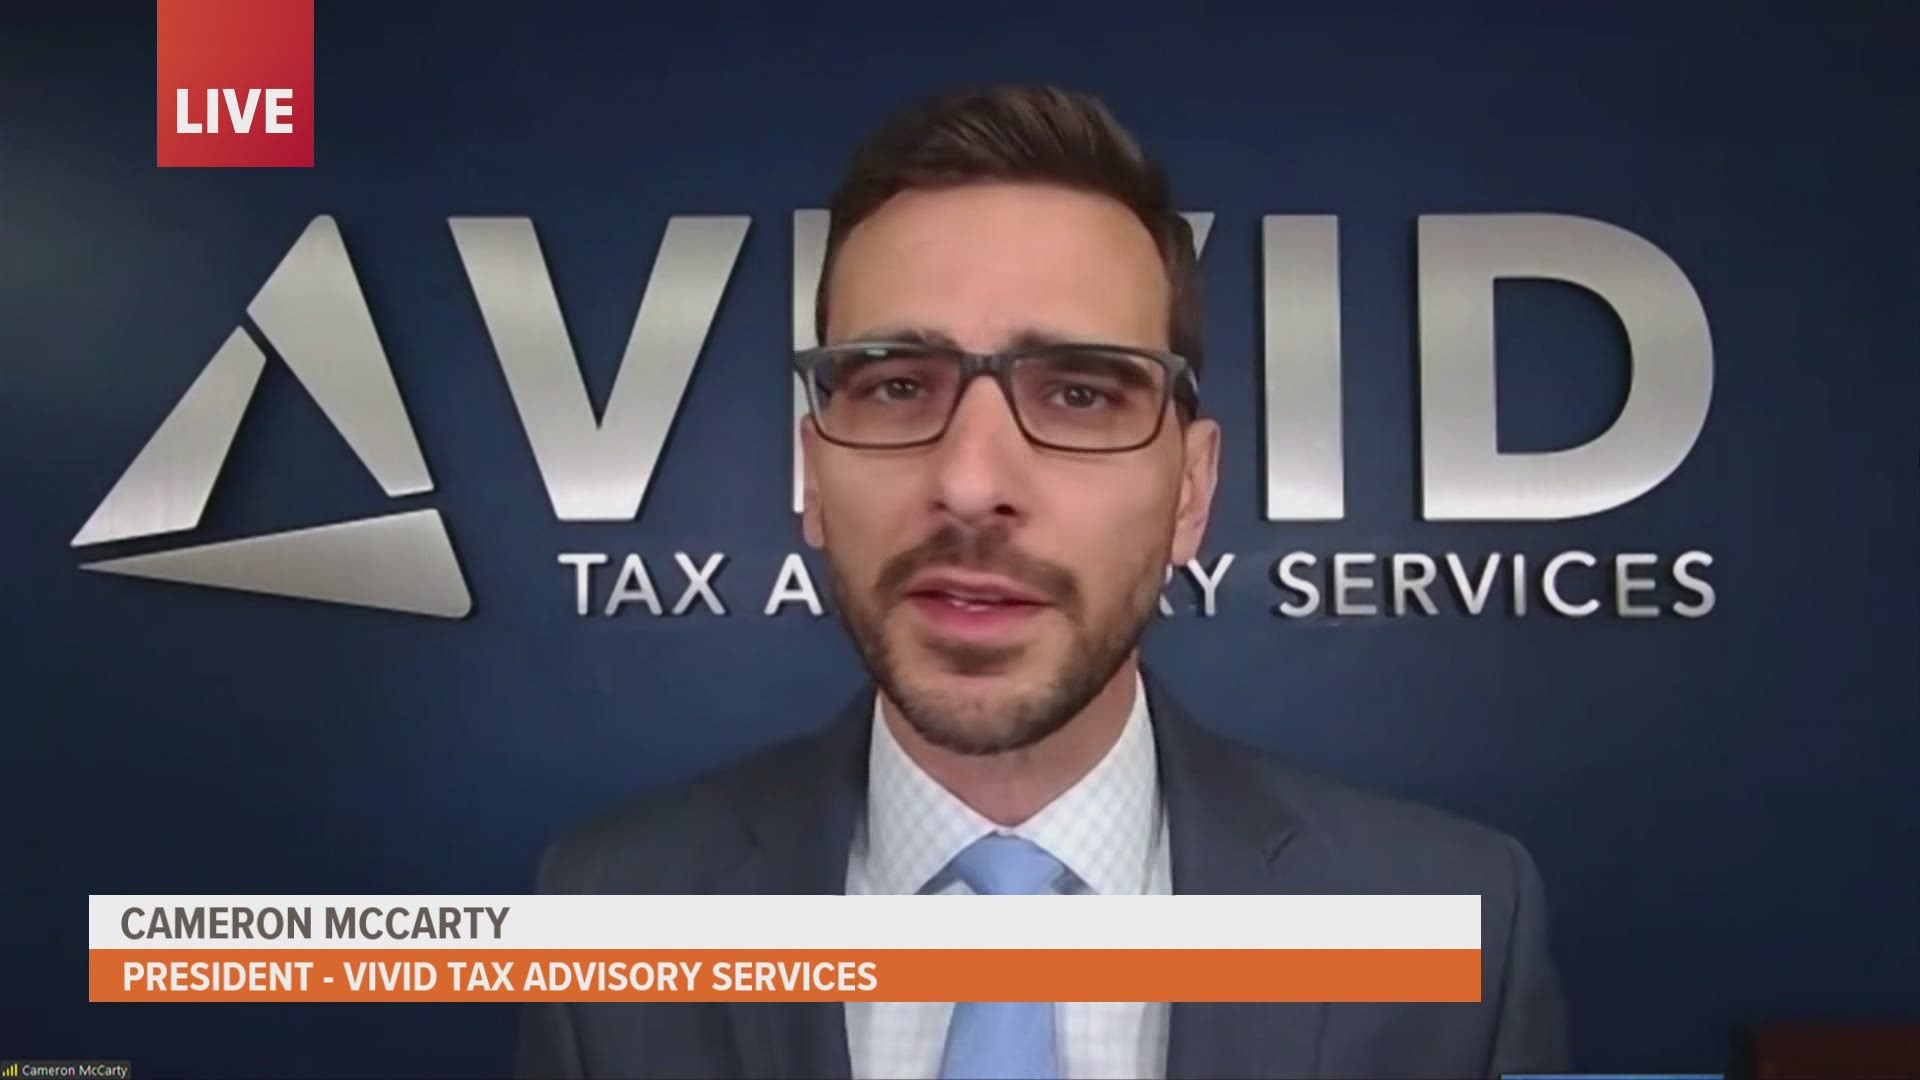 Cameron McCarty, President-Vivid Tax Advisory Services, with financial tips for graduates and those who are helping them celebrate.